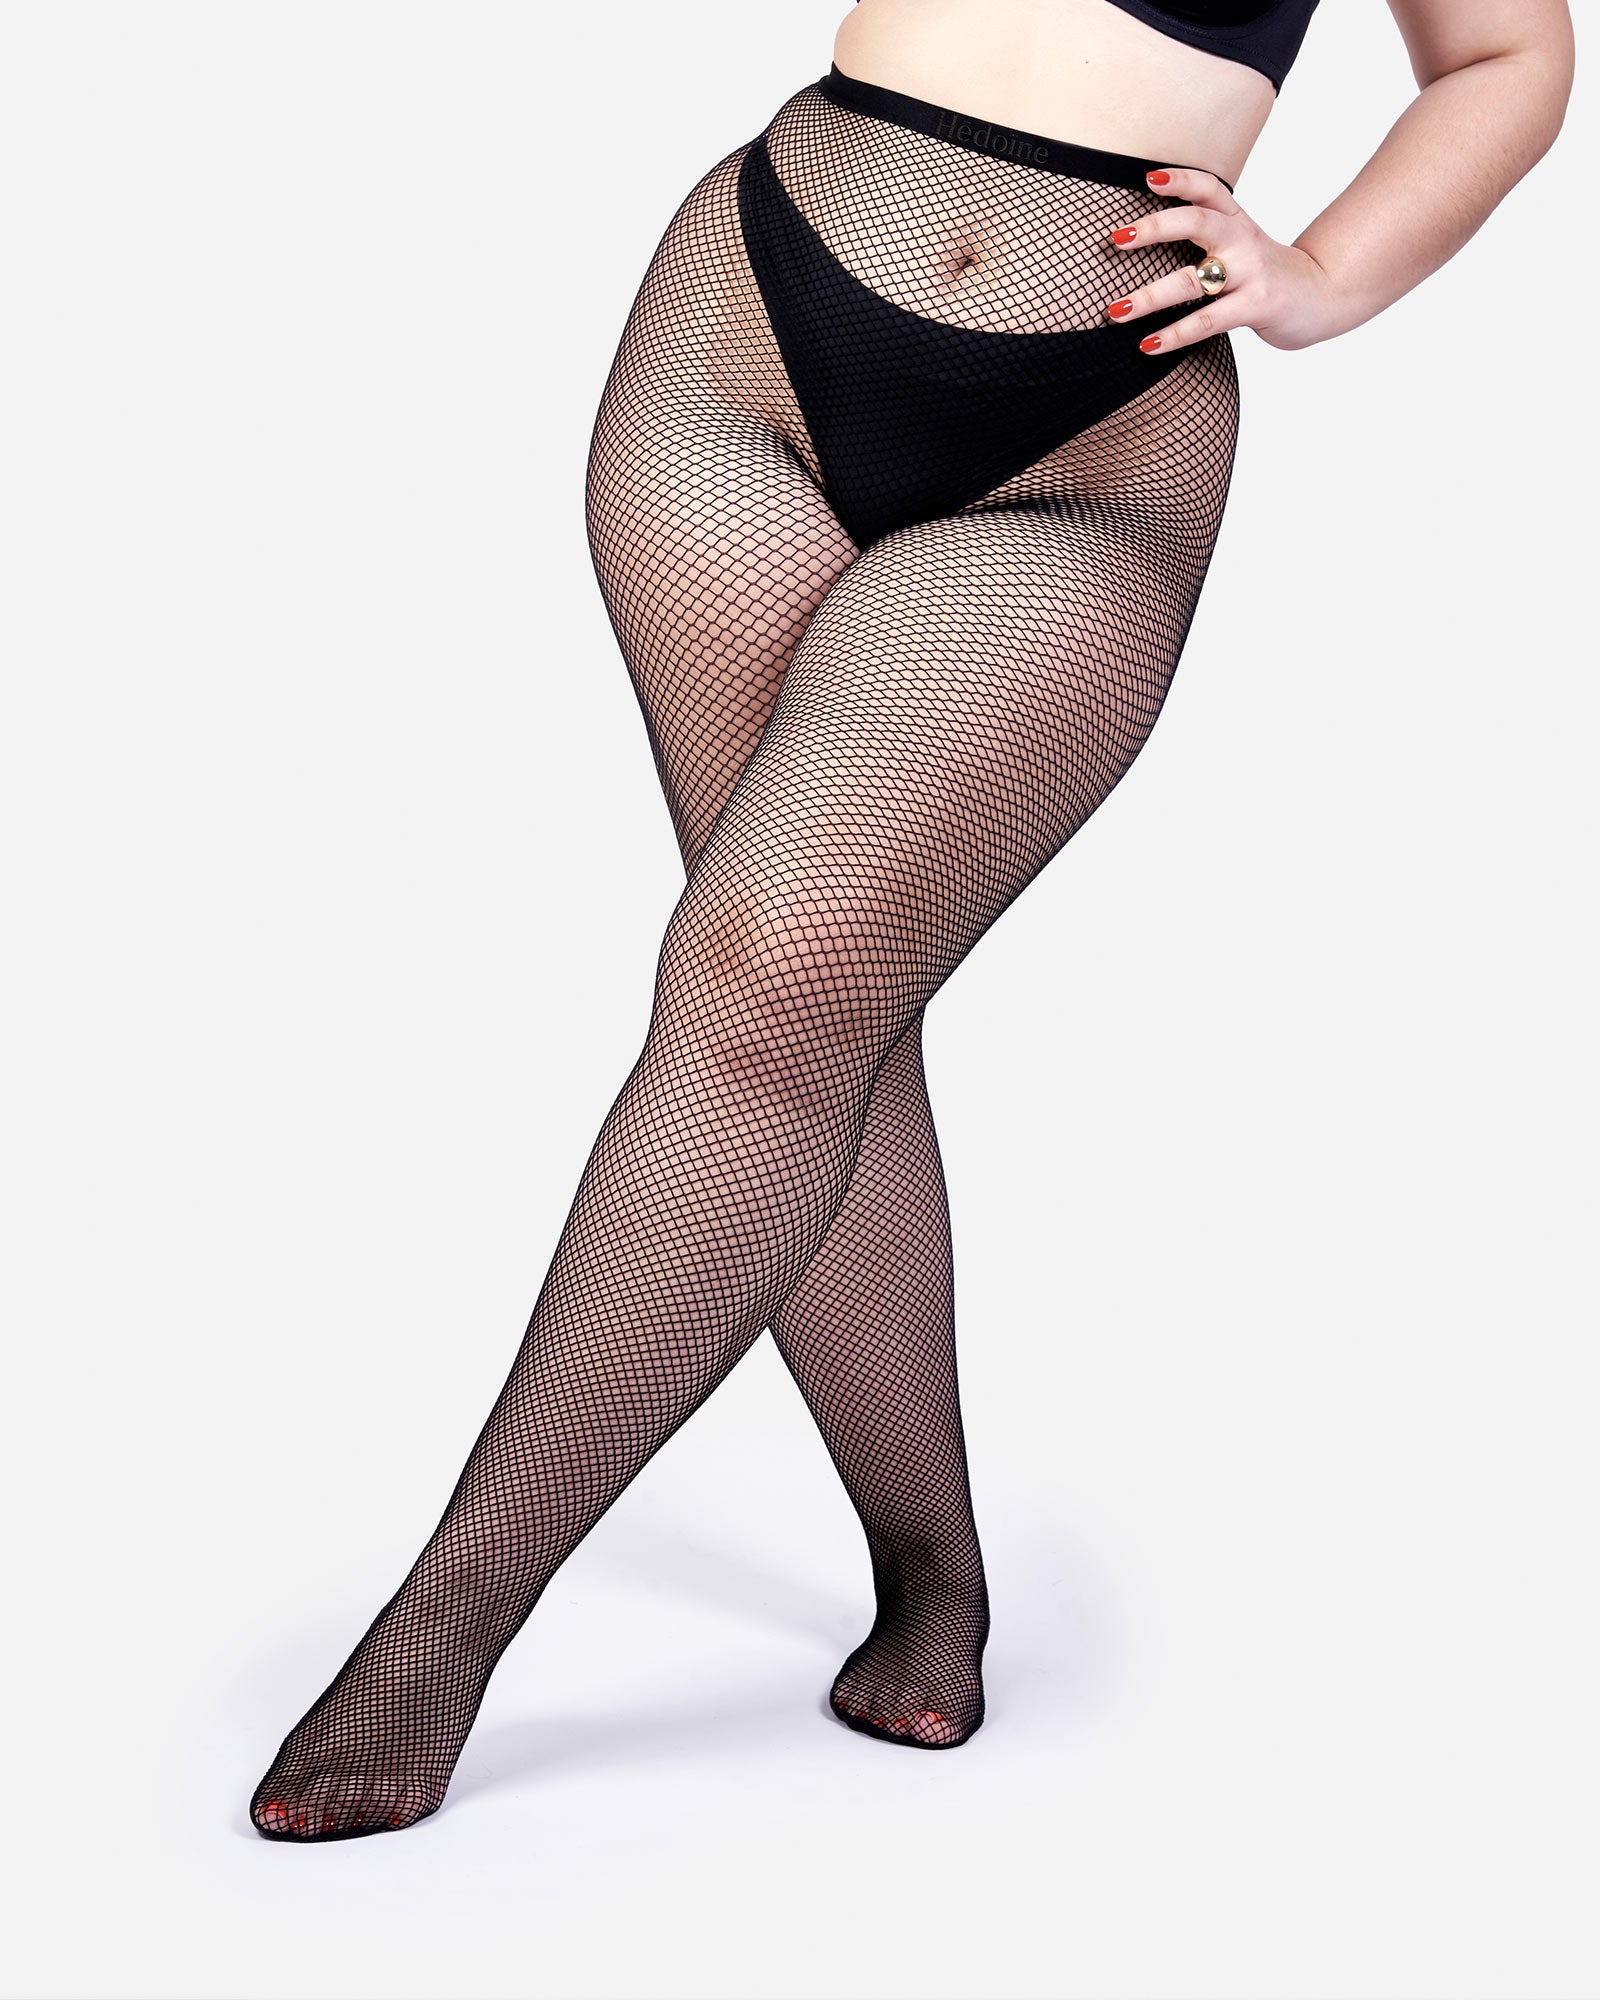 Hedoine The Drama | Fishnet Tights Black Sustainable Hosiery supplied by Hedoine GBP32.00